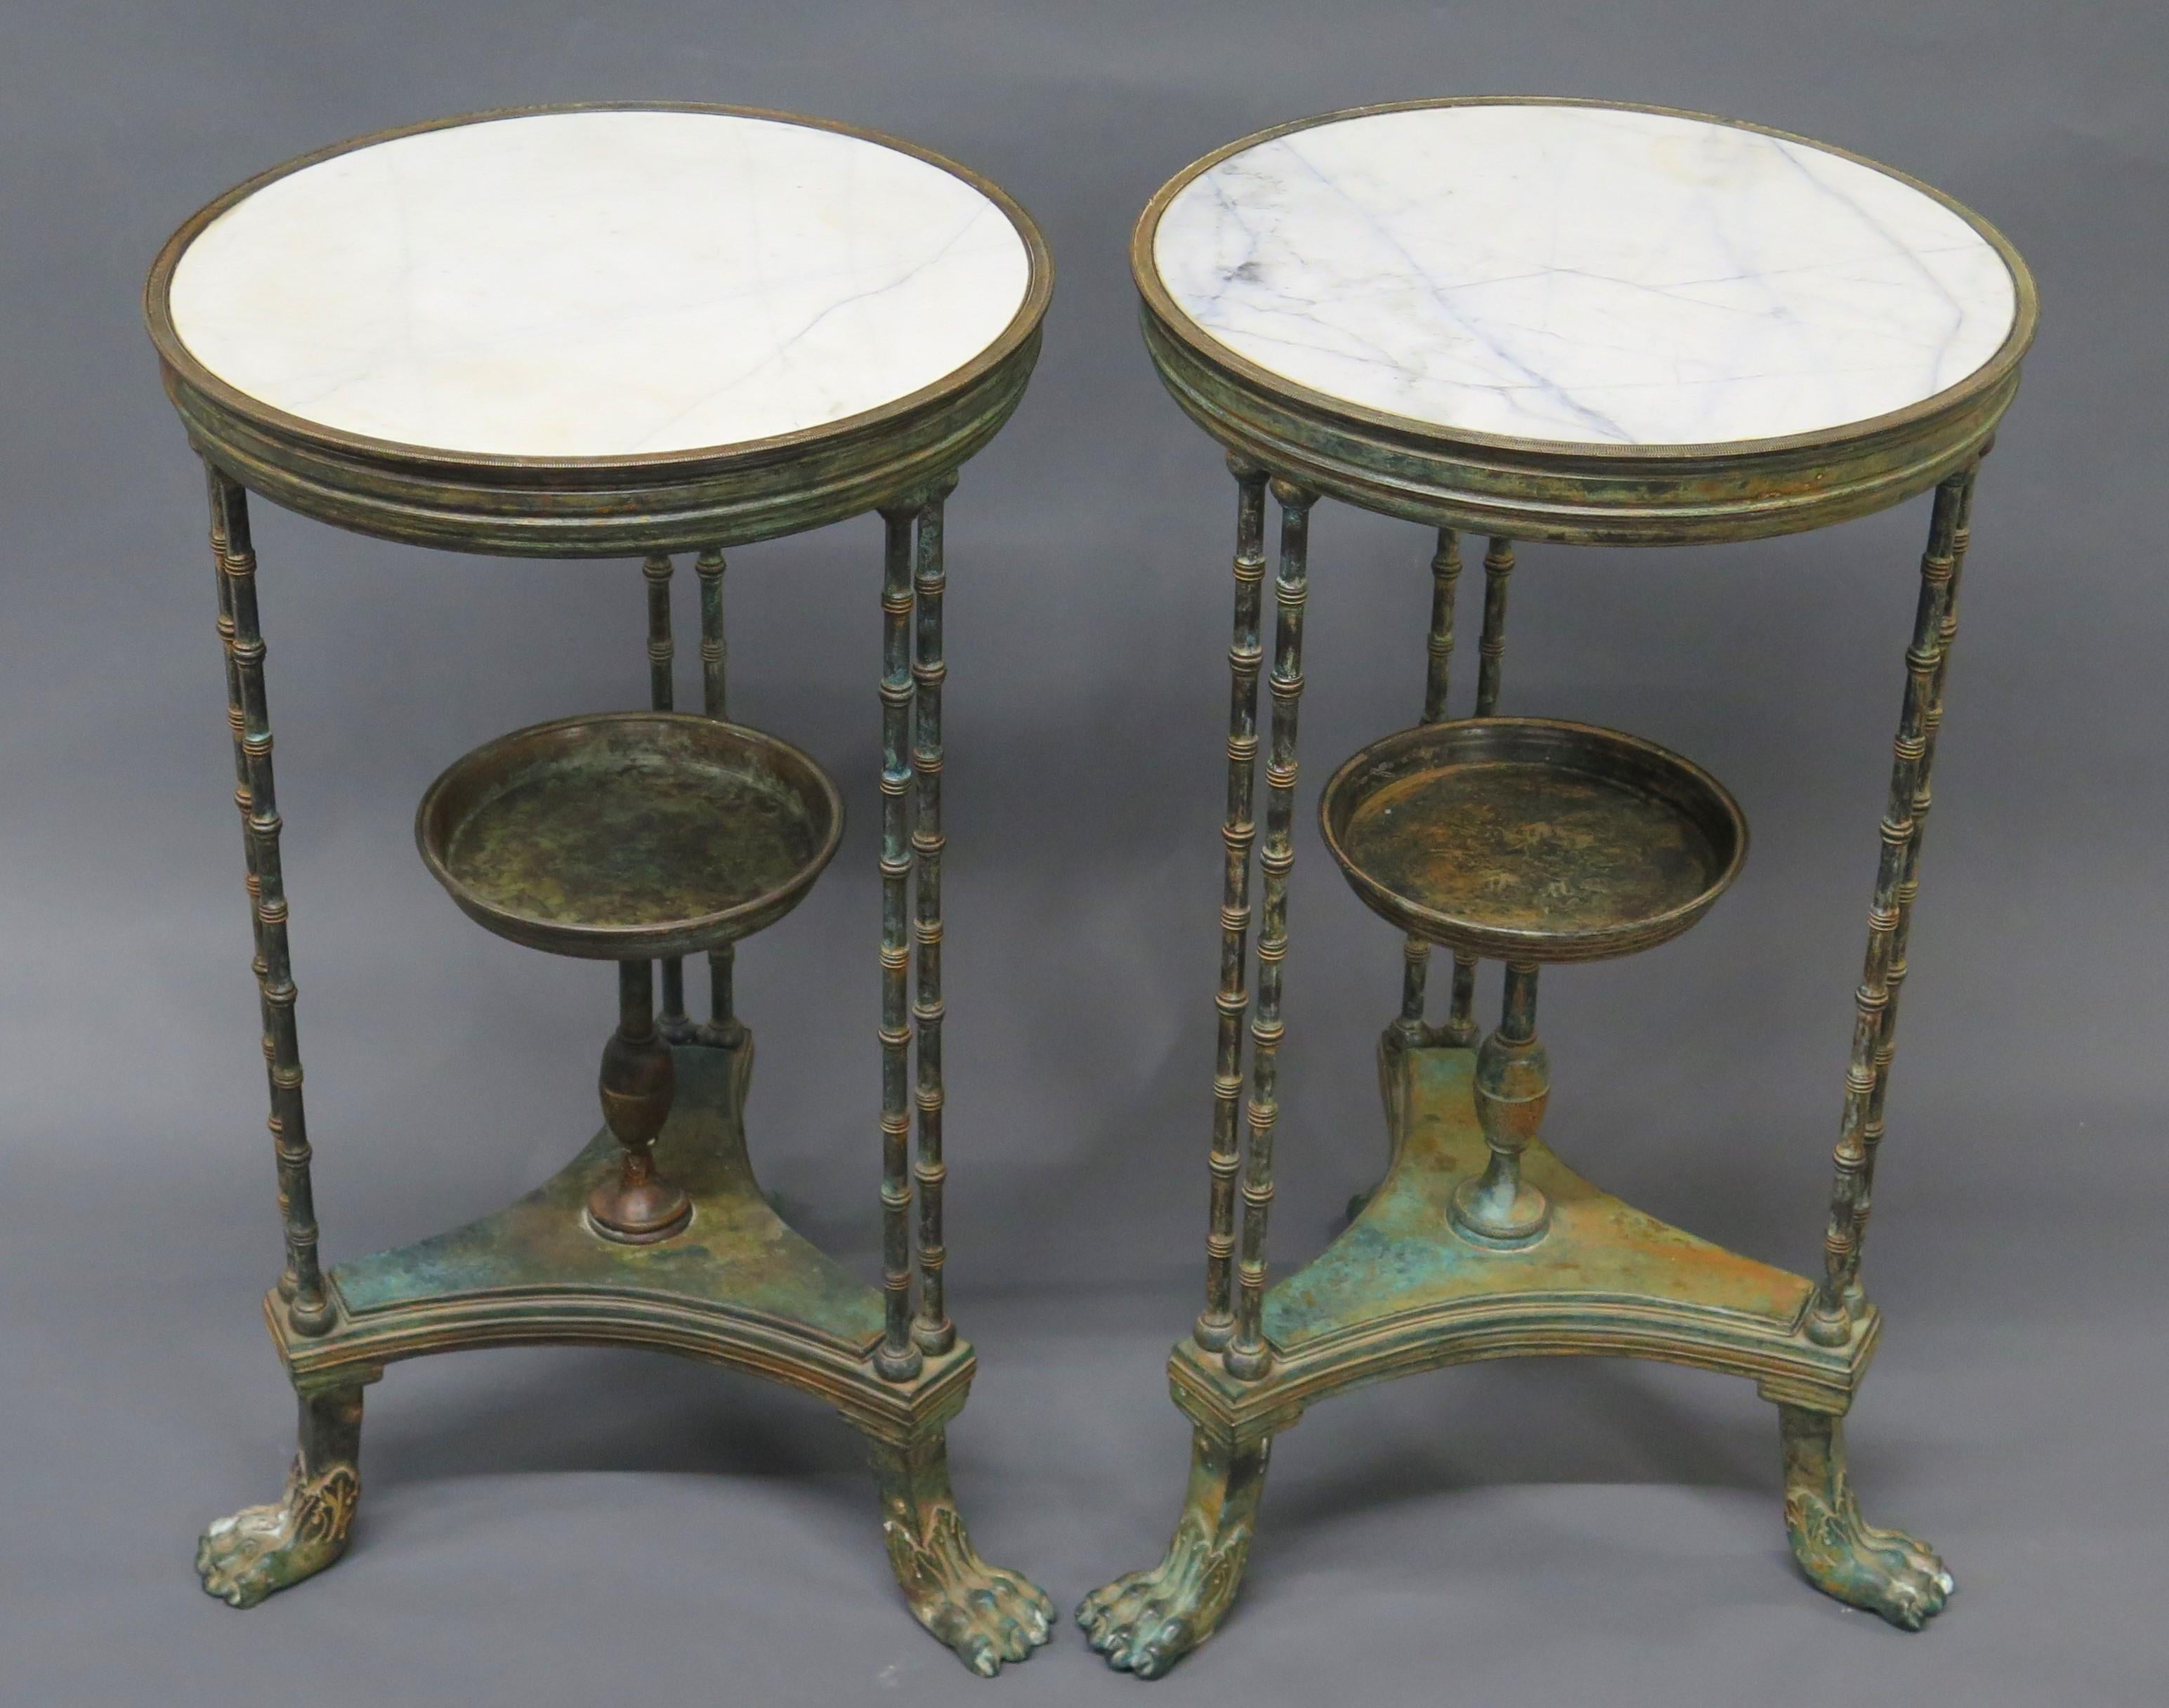 French Pair of Louis XVI-Style Patinated Bronze Gueridons (Tables) For Sale